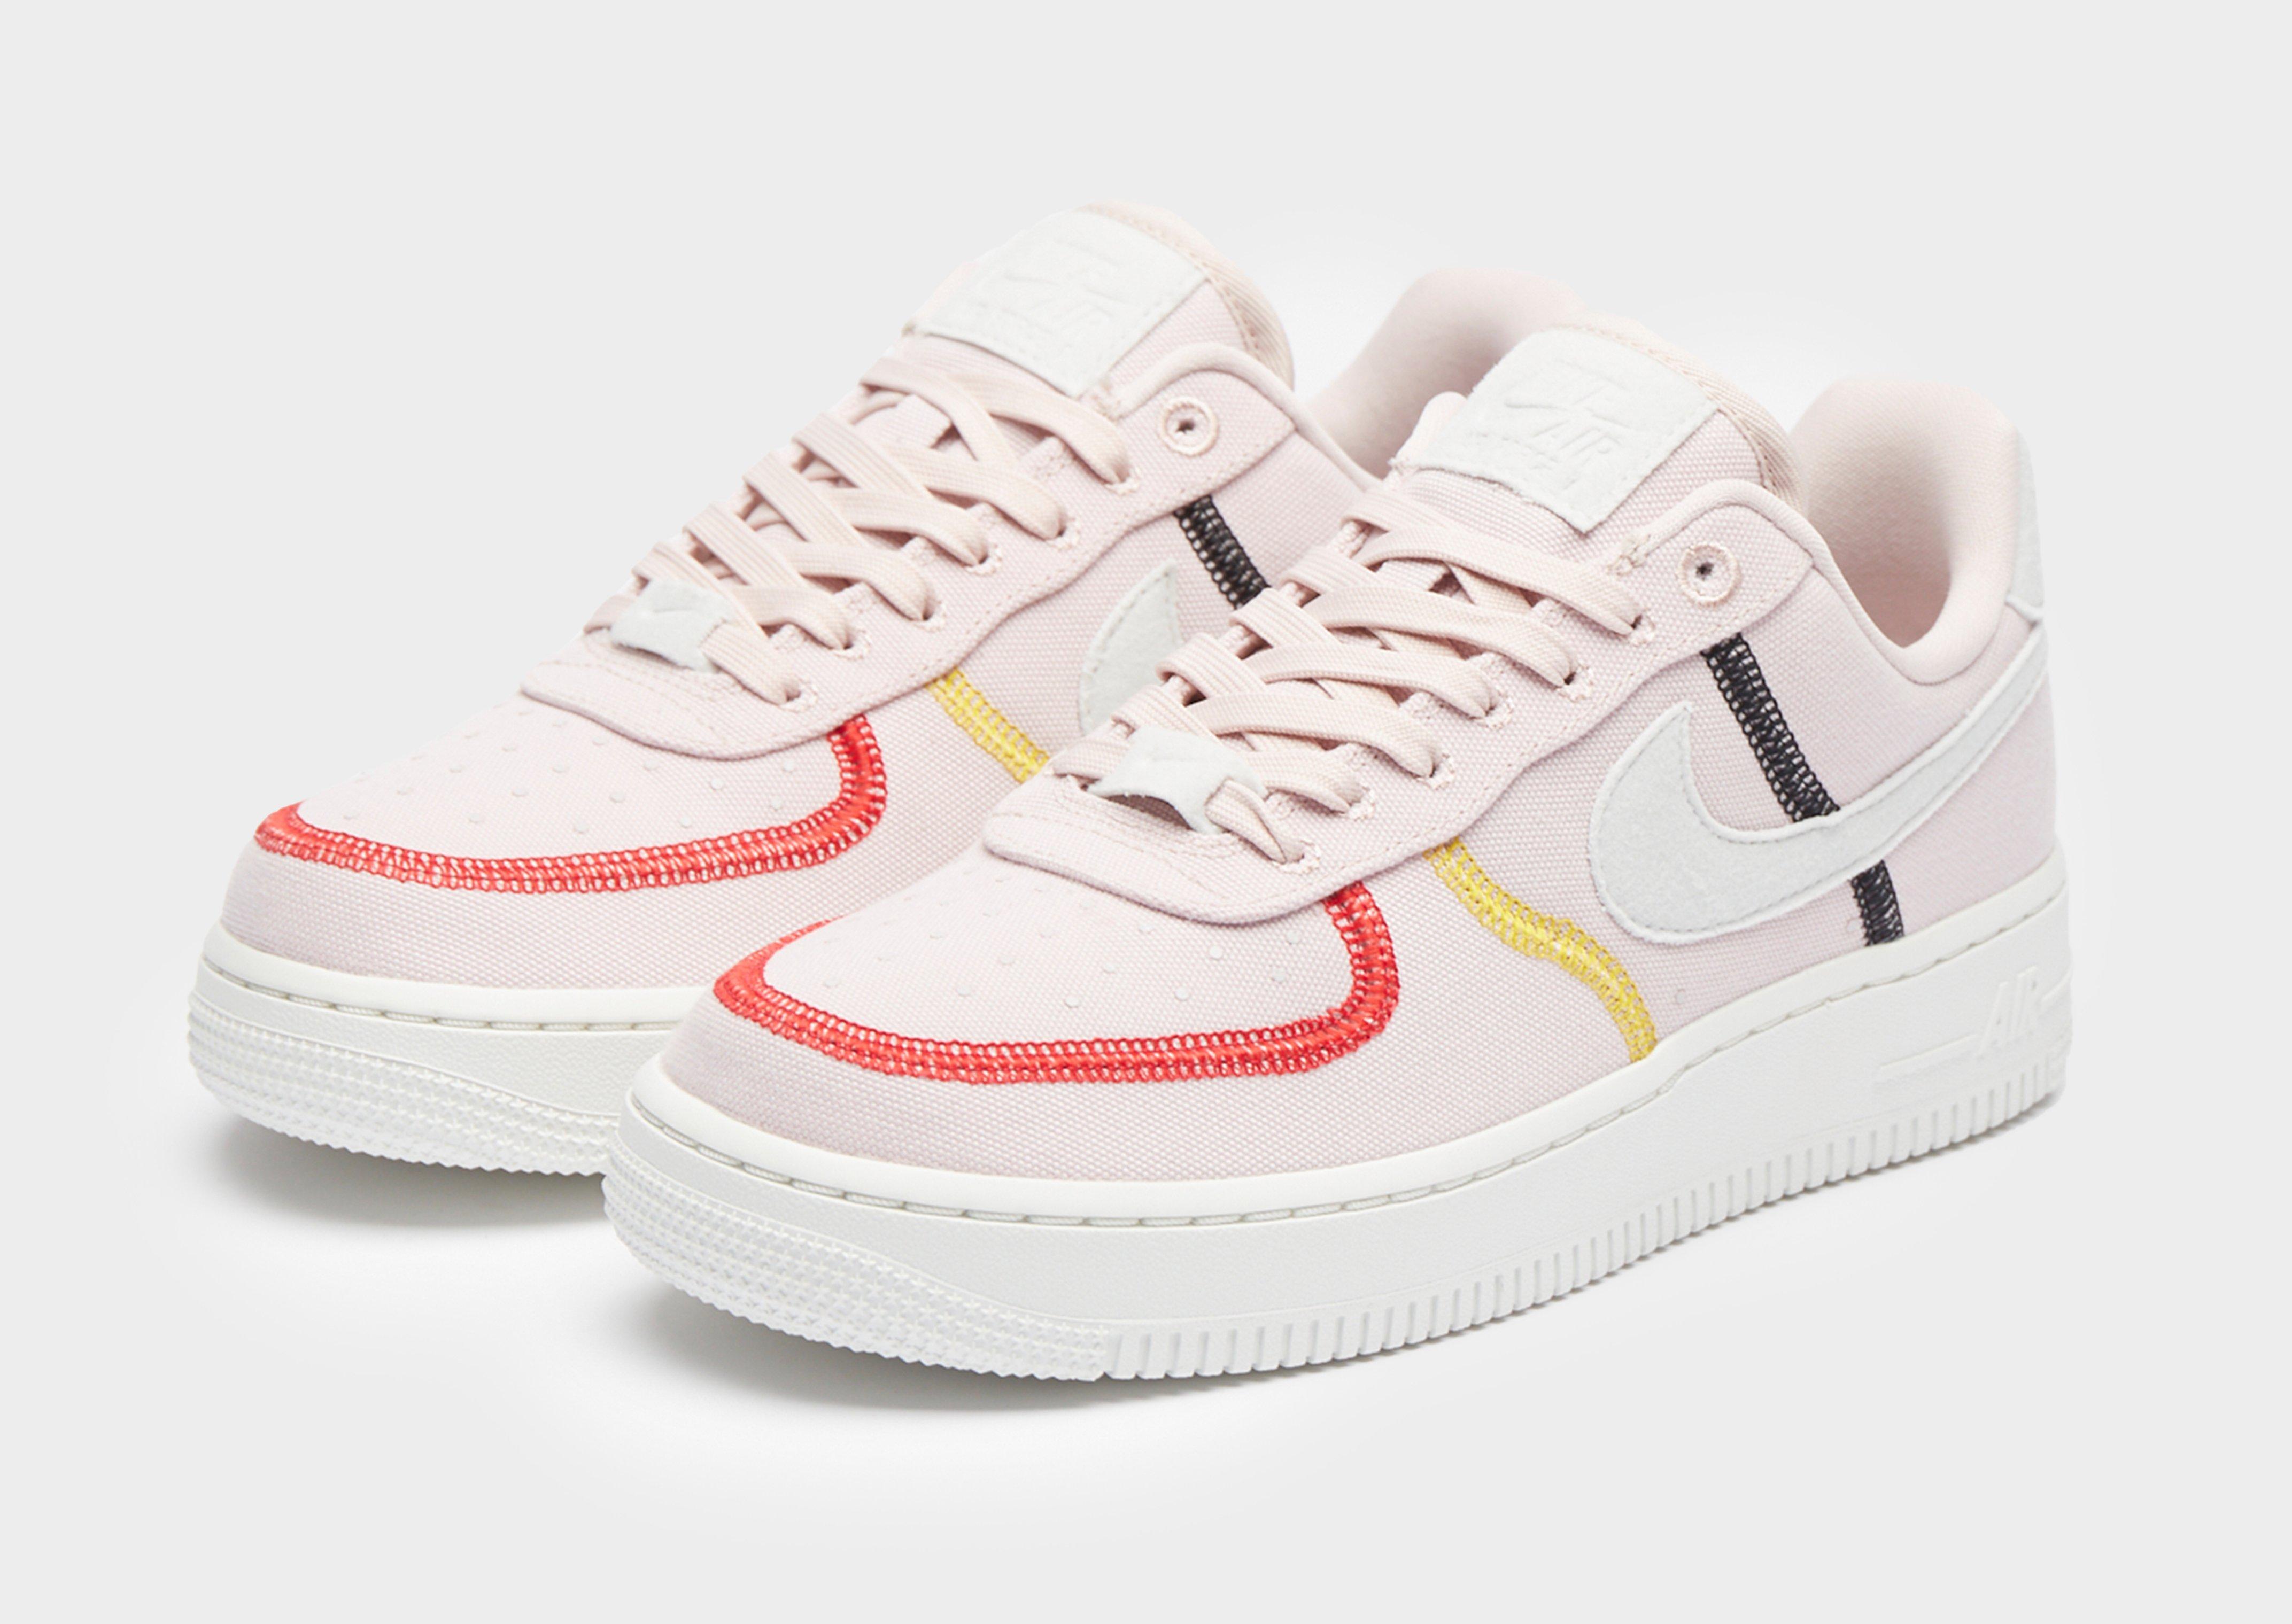 Acquista Nike Air Force 1 '07 LX Donna